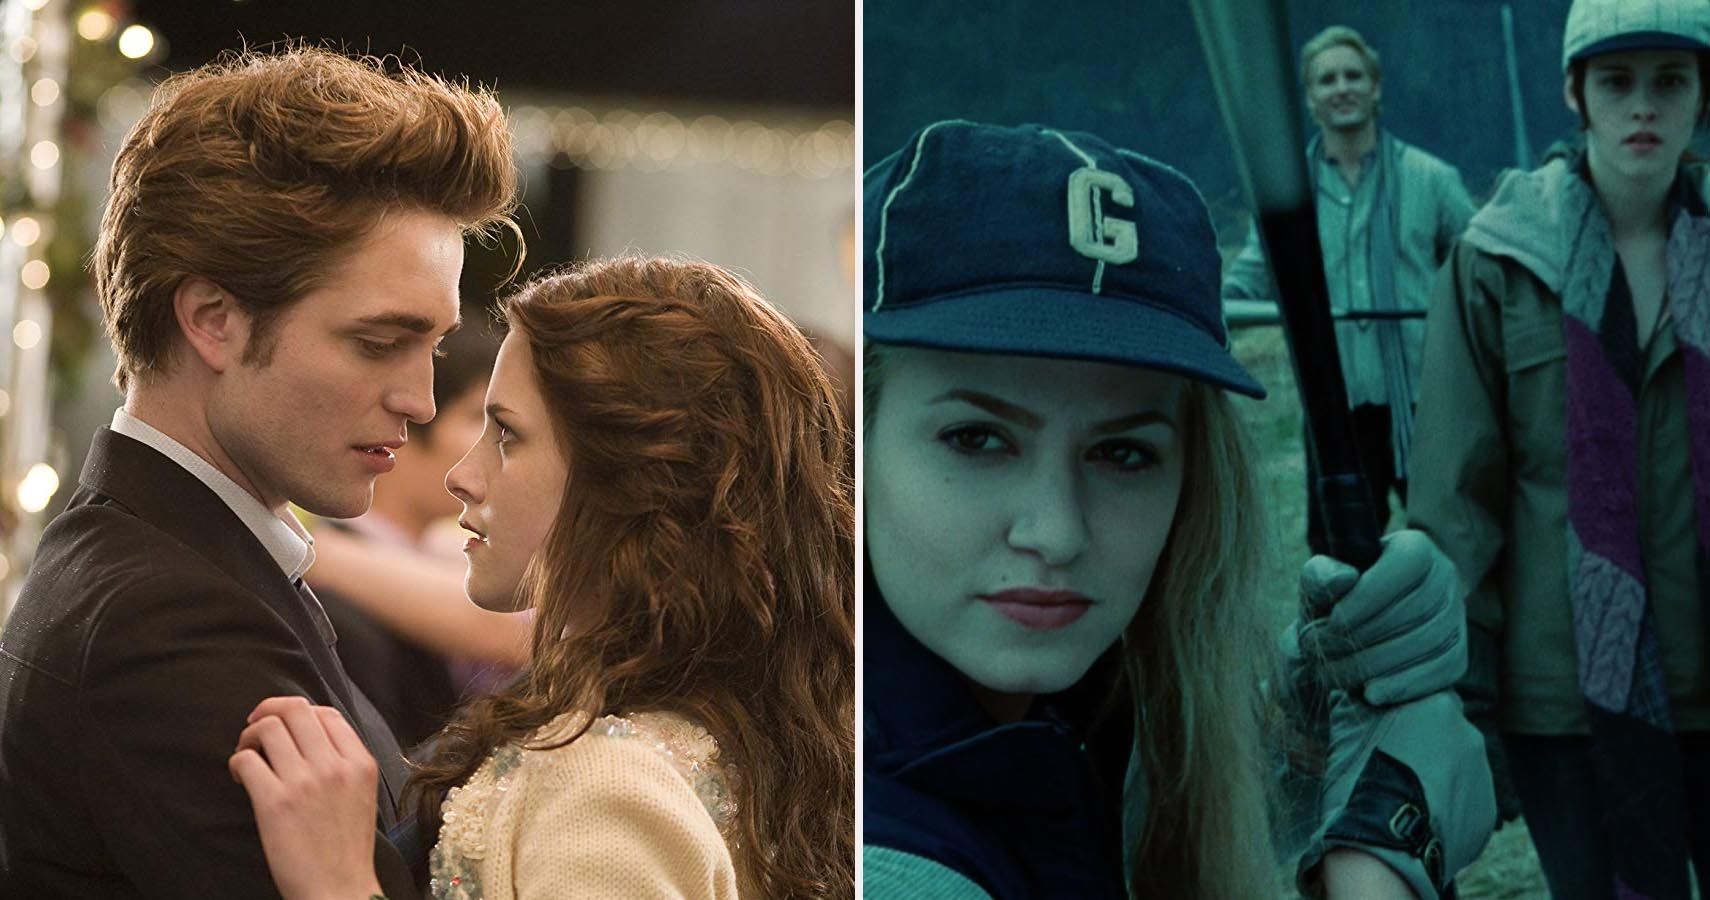 Twilight 5 Scenes That Made The Original Film Better And 5